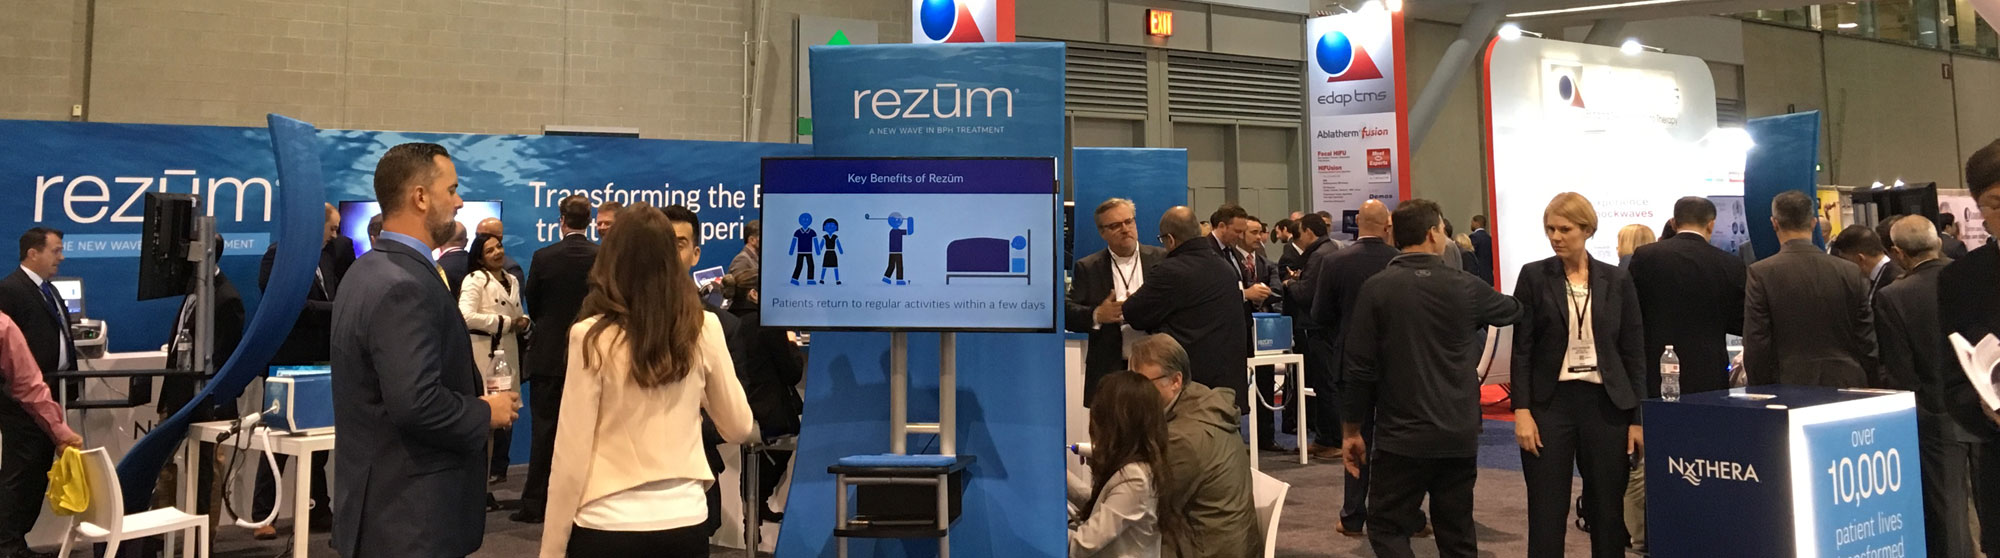 Attendees at Rezum conference